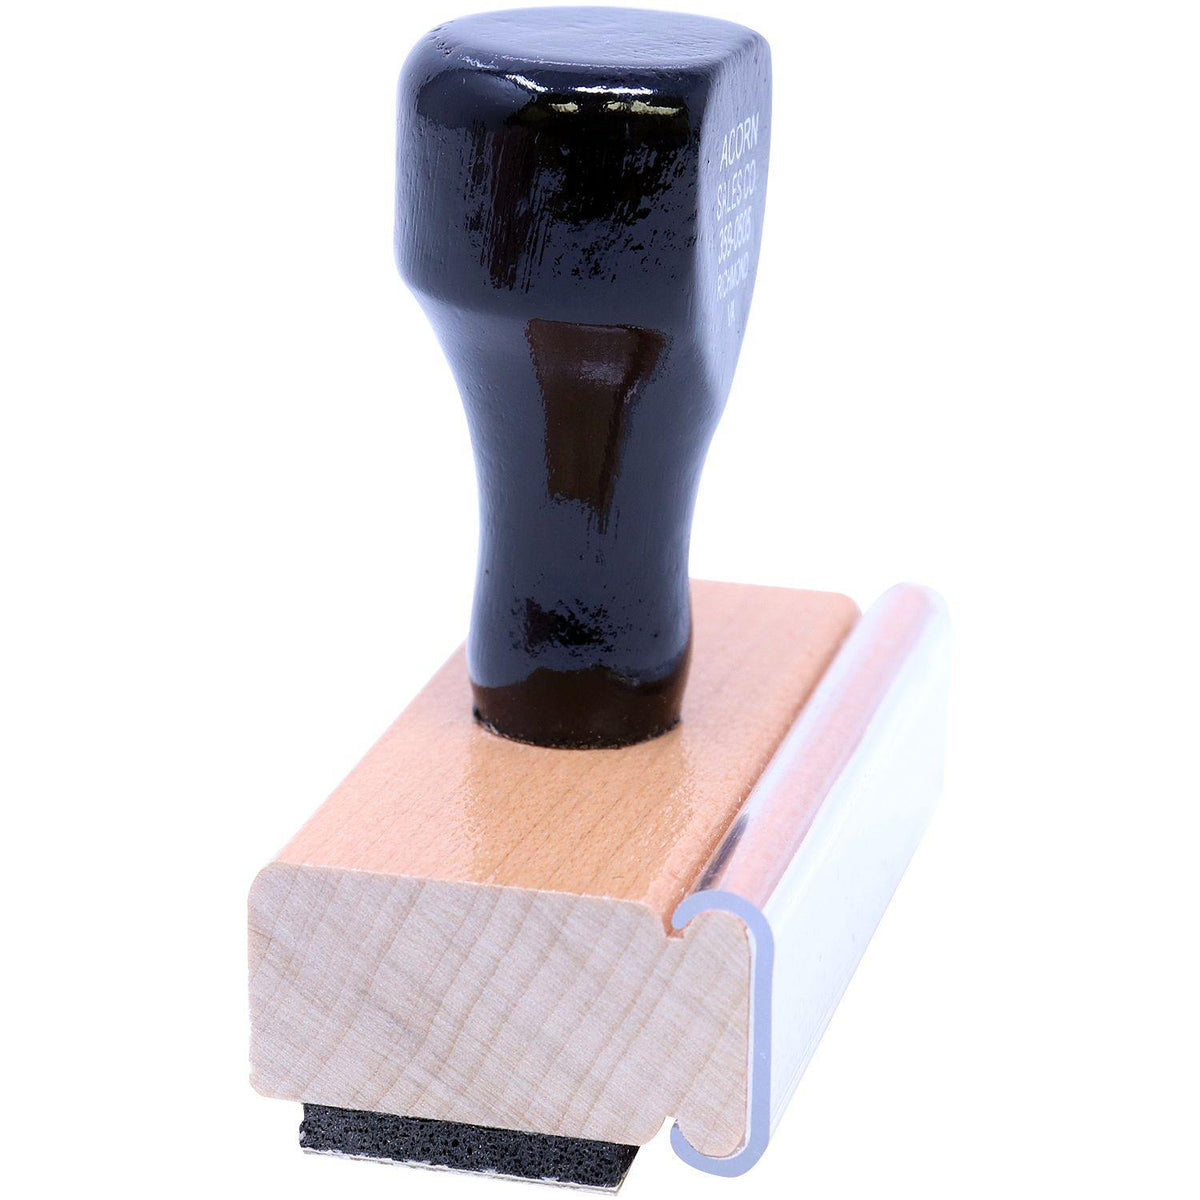 Side View of Large Perishable Rubber Stamp at an Angle